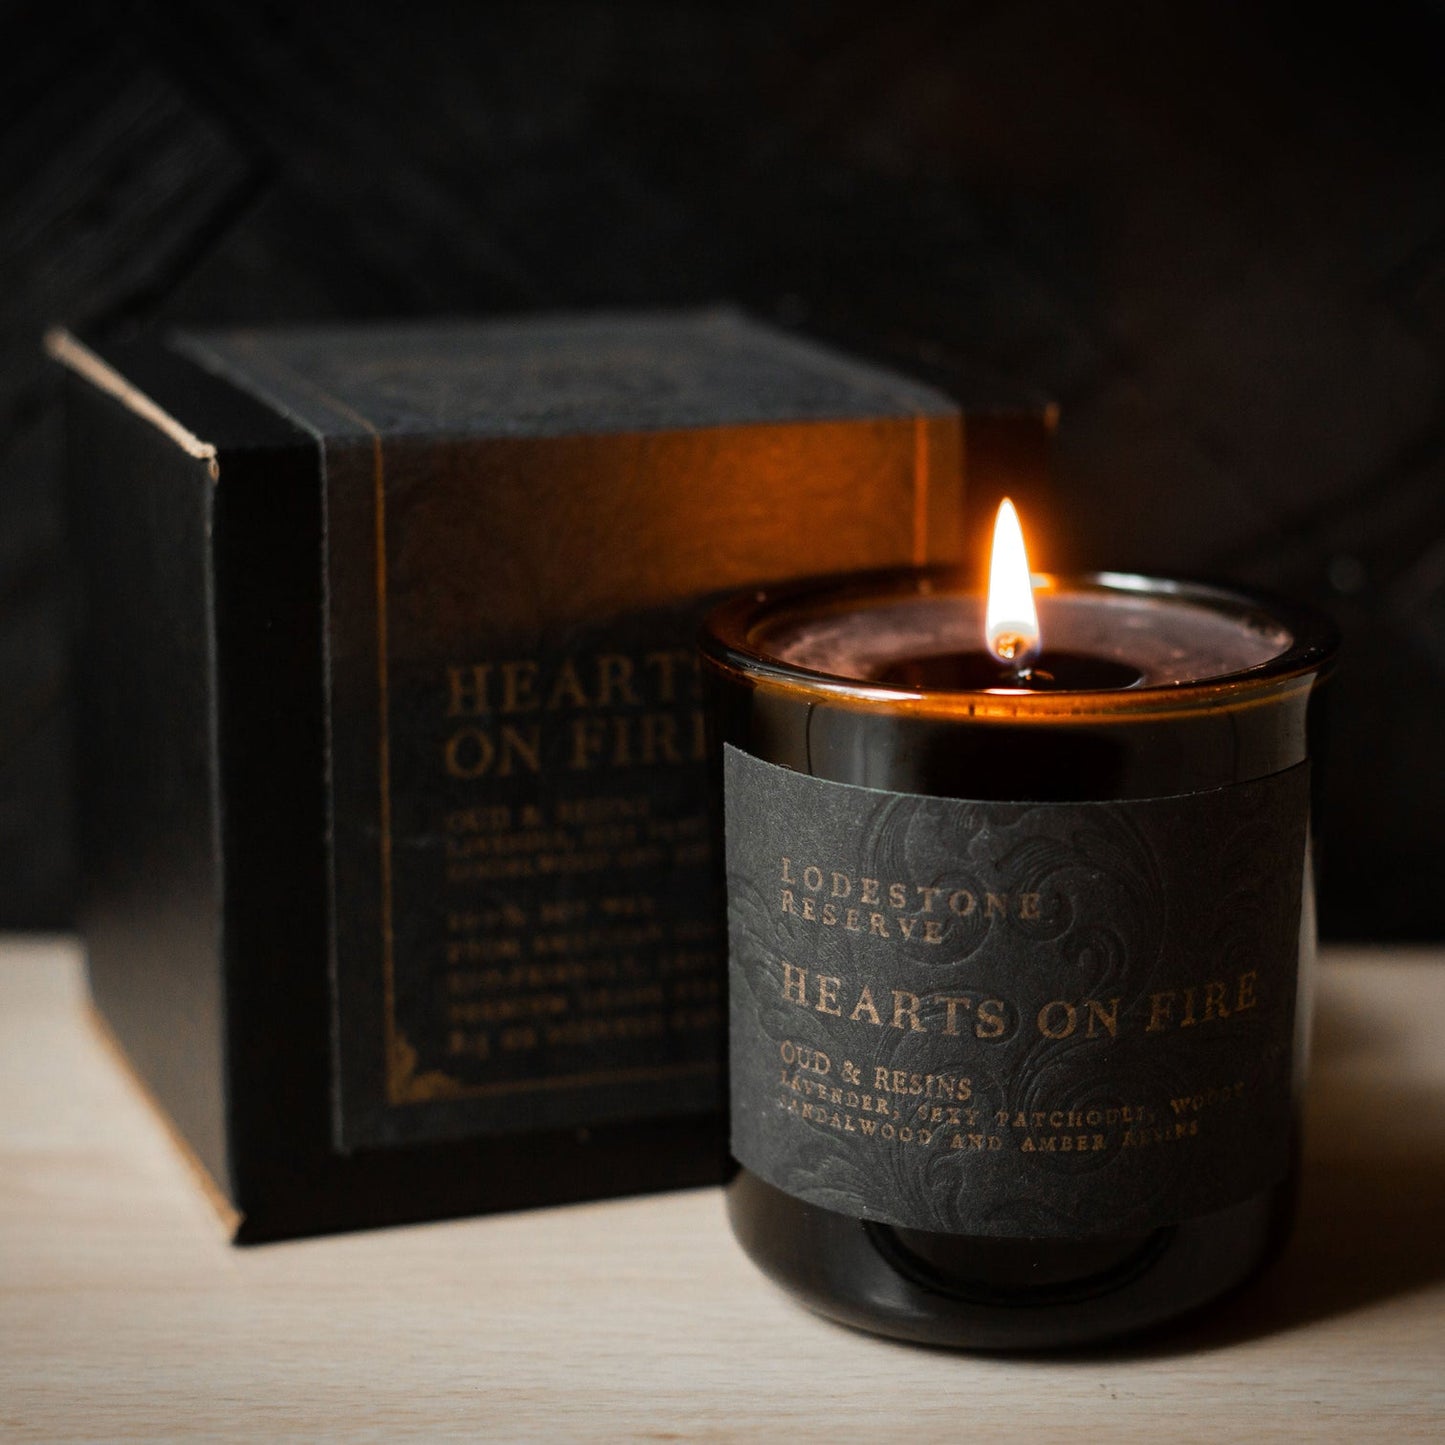 Lodestone Candles - Hearts On Fire Candle